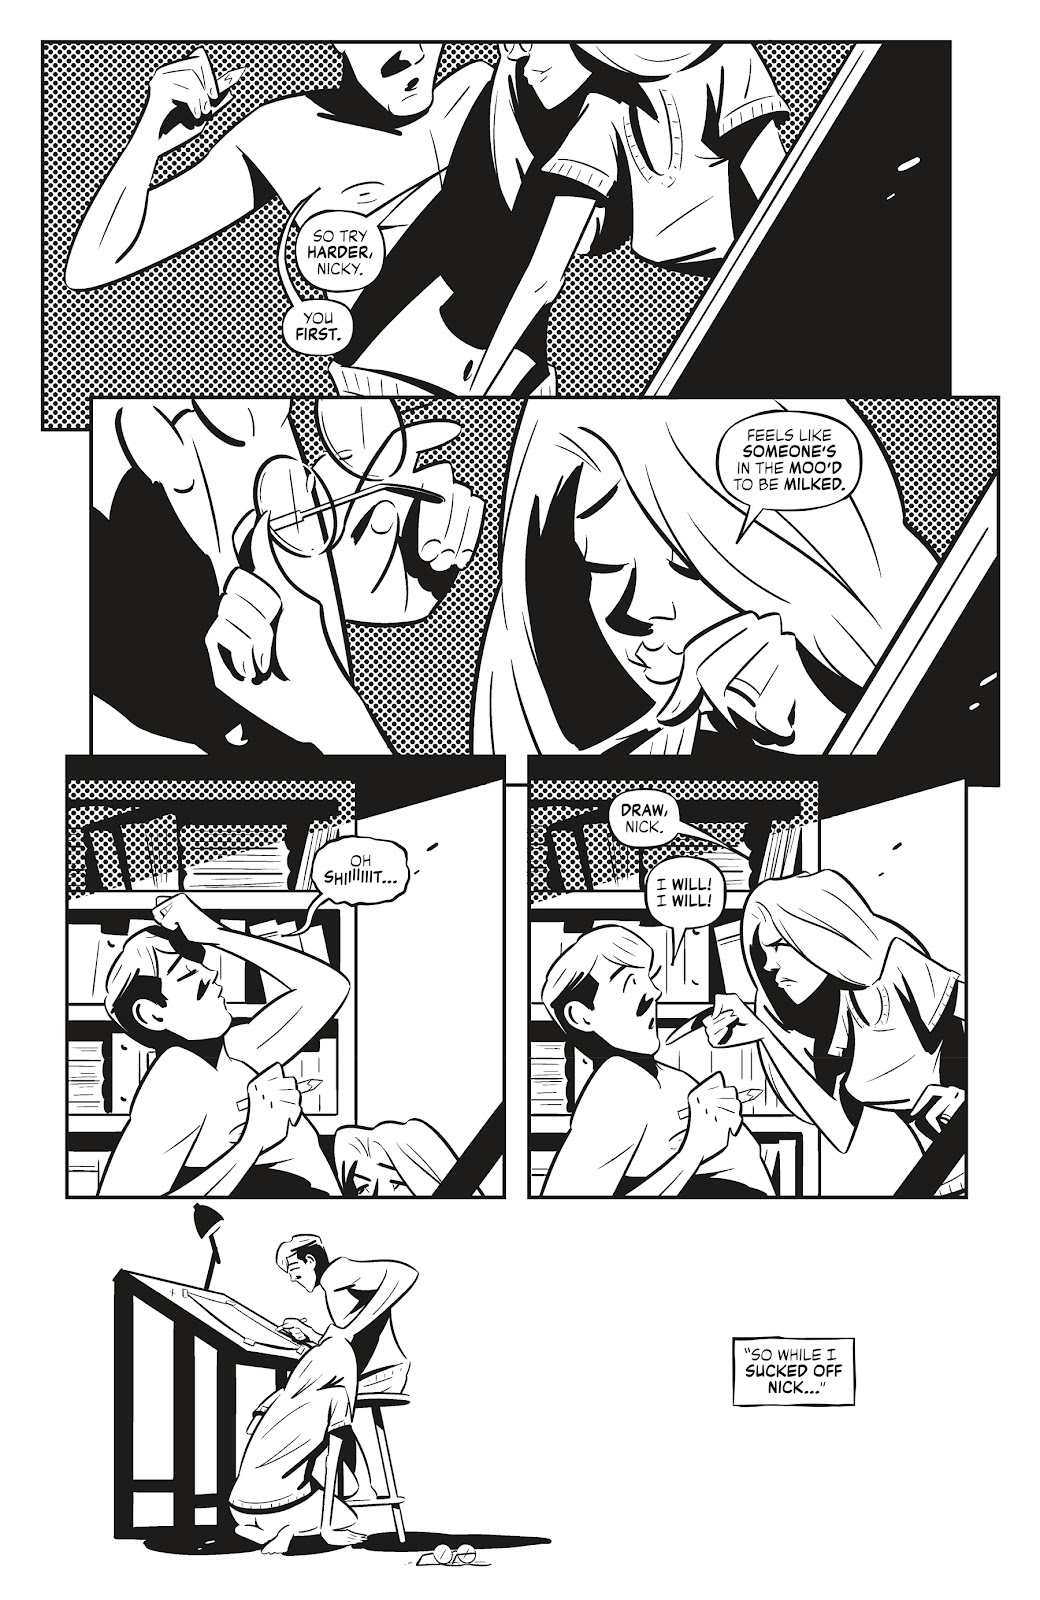 Quick Stops Vol. 2 issue 1 - Page 10